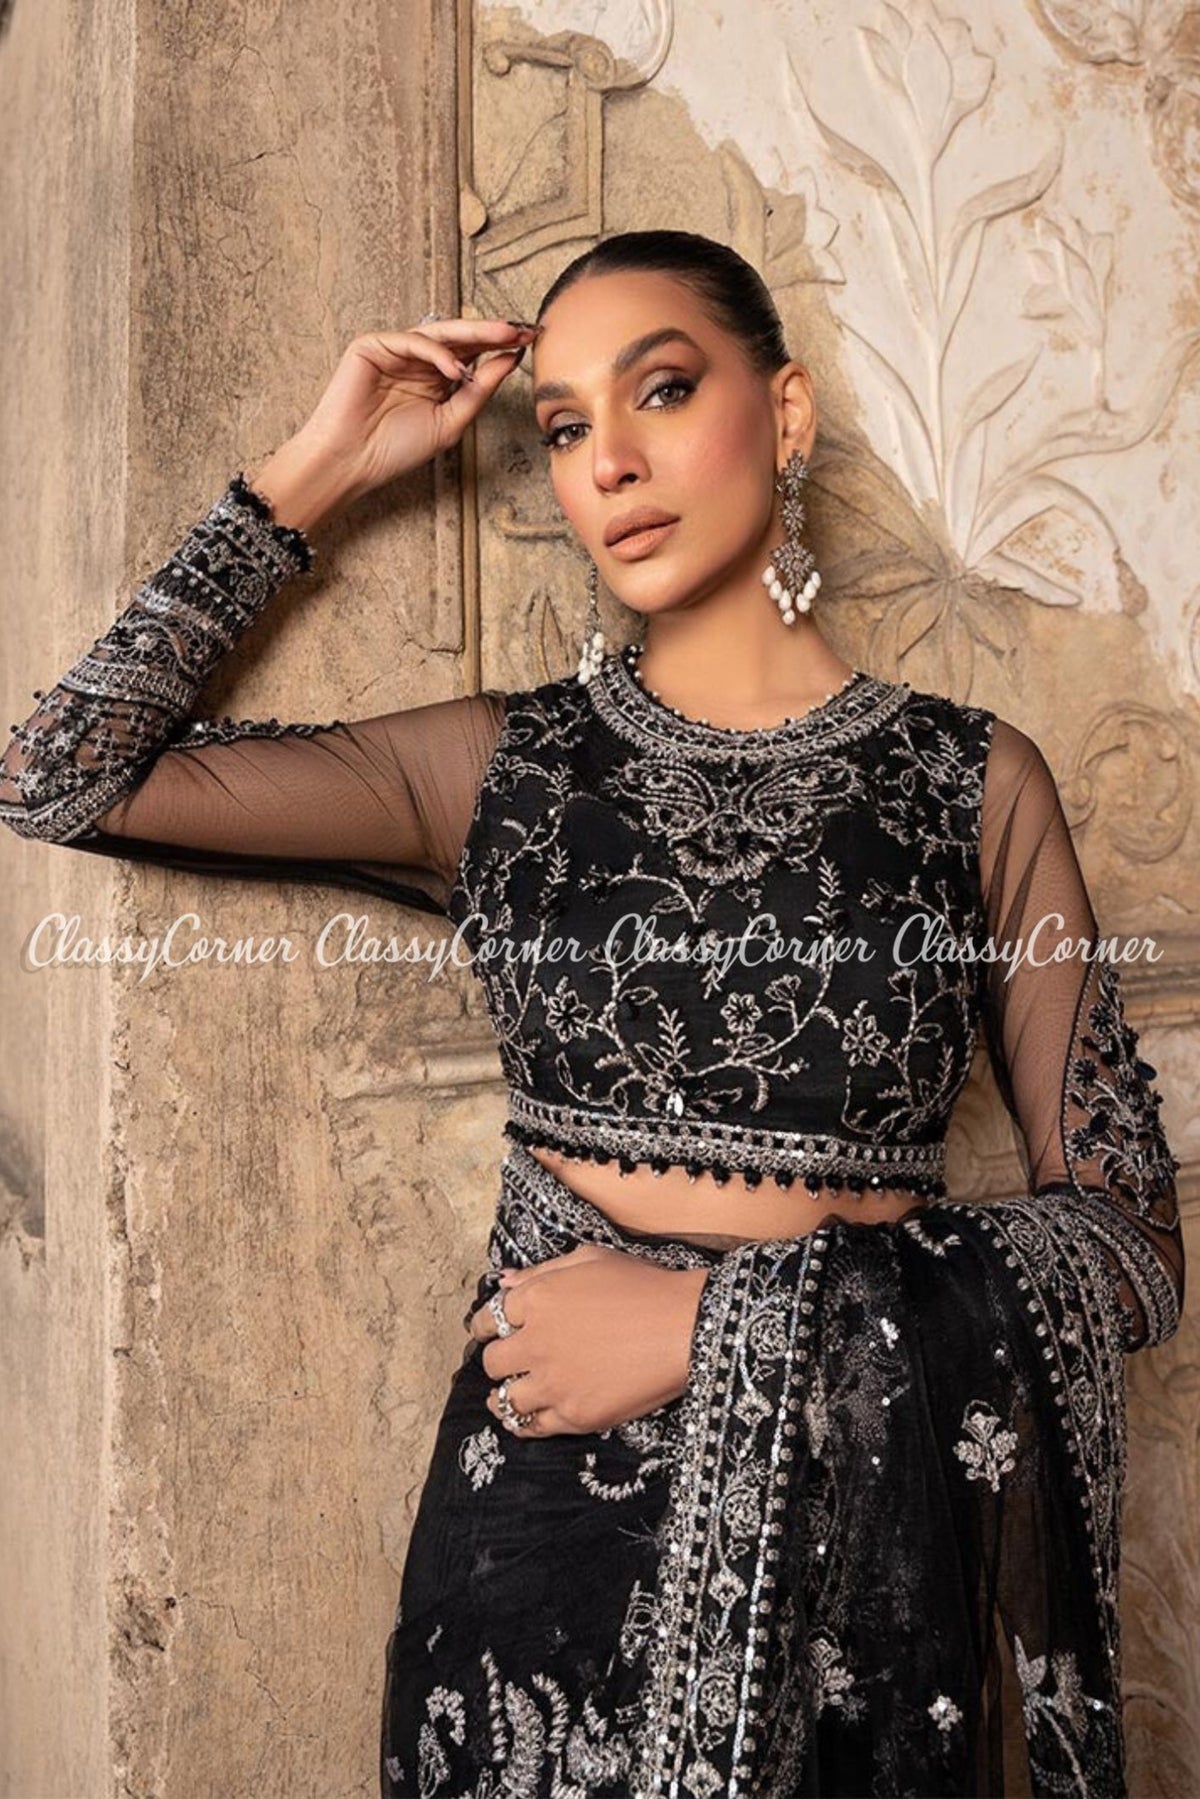 Black Silver Net Embellihed Party Wear Saree